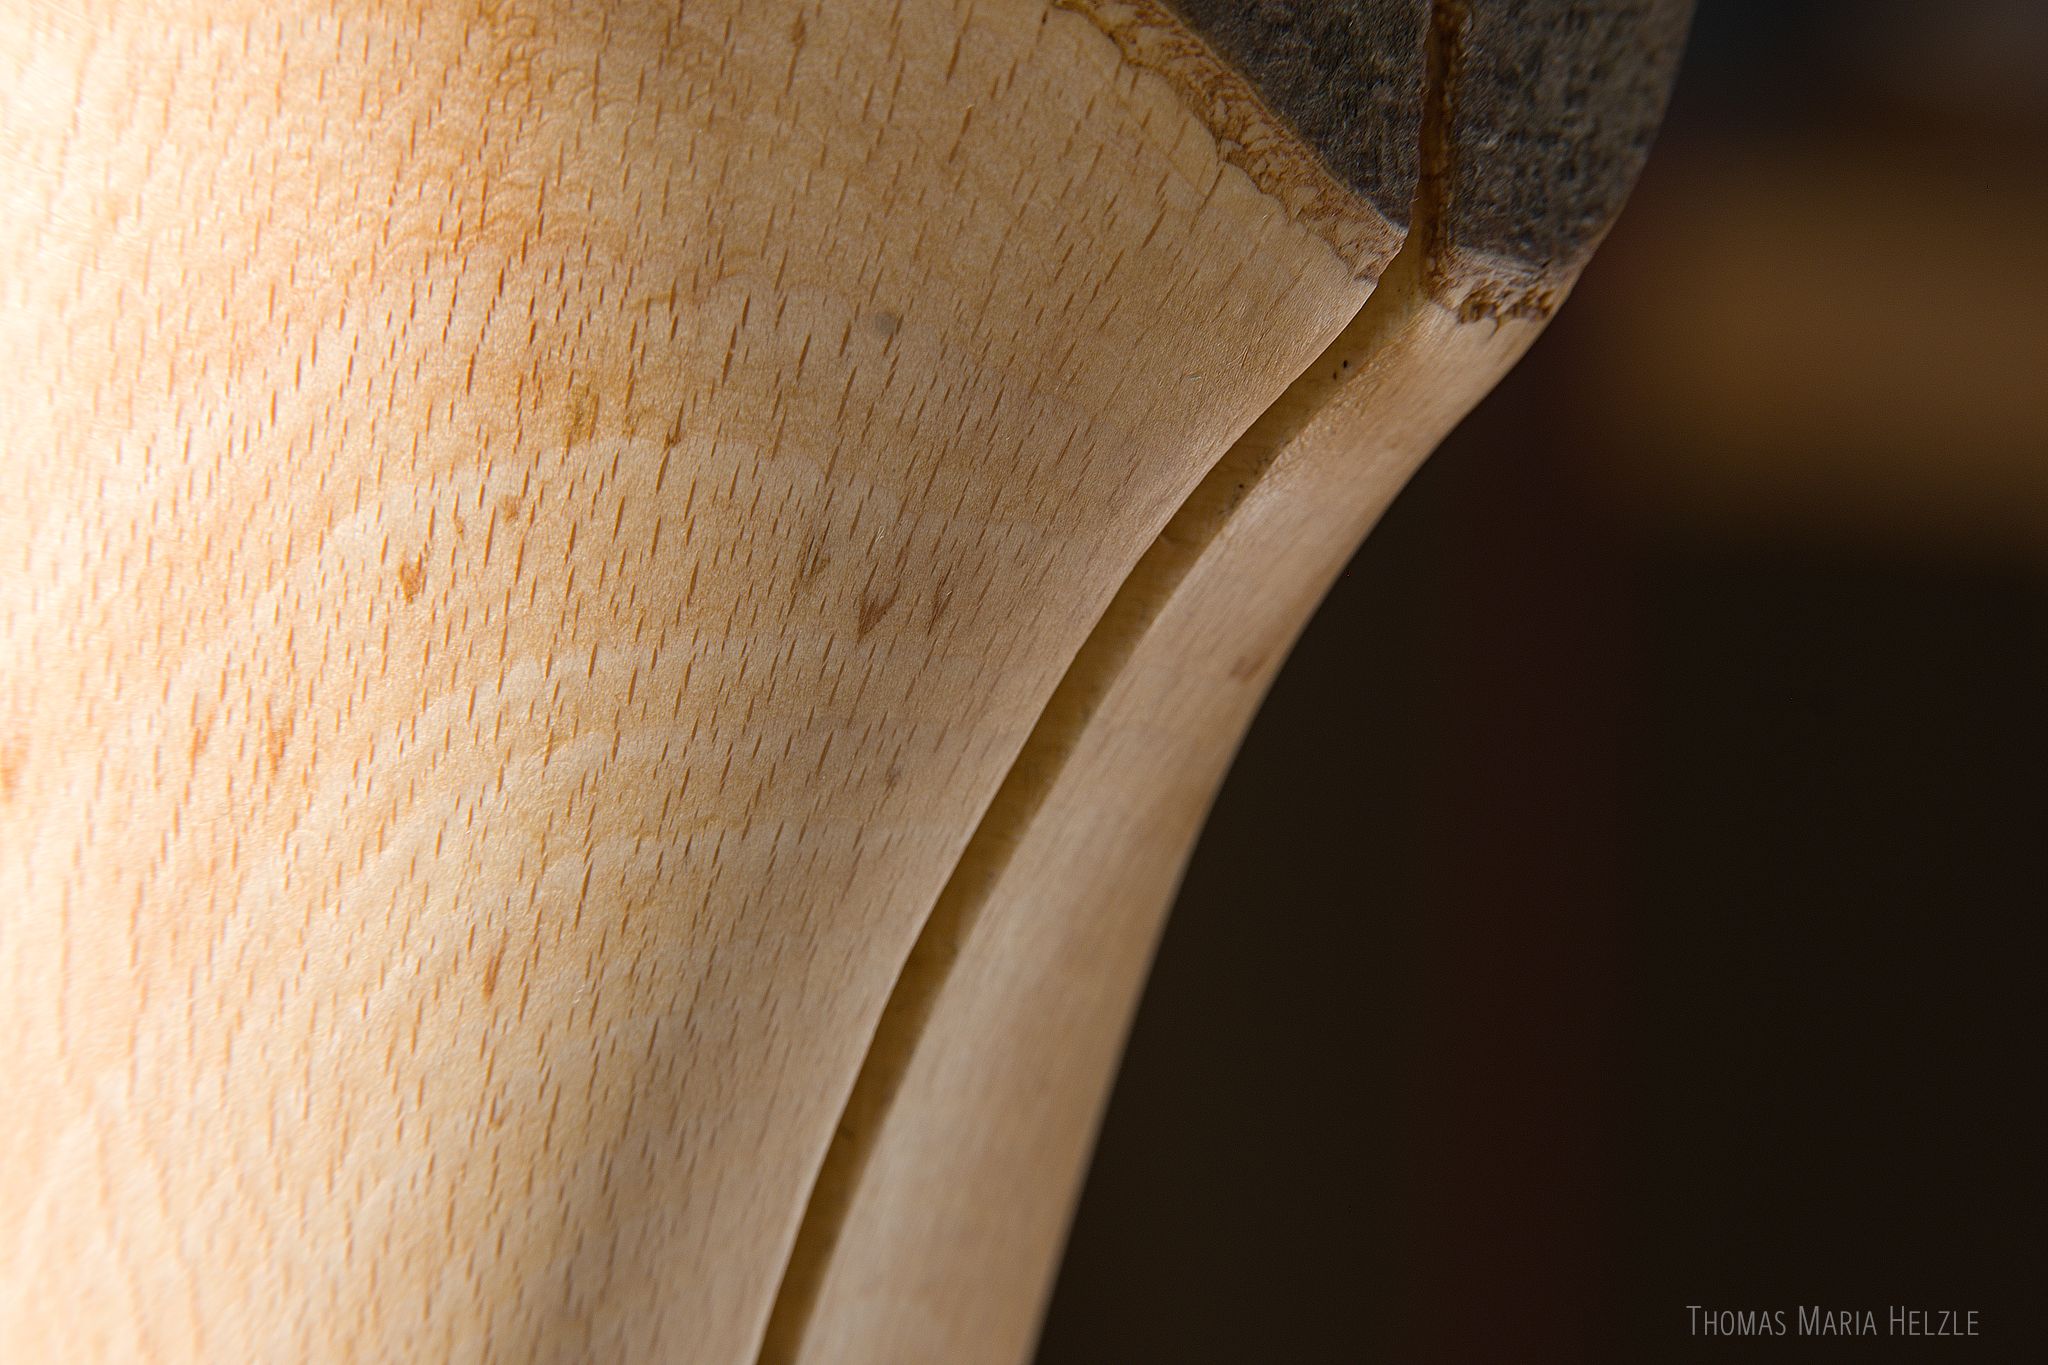 A close up of a big crack that formed on the front of the sculpture, which was carved from very fresh wood. Wood grain is covering the surface and in the upper right we see the edge of where the bark begins.